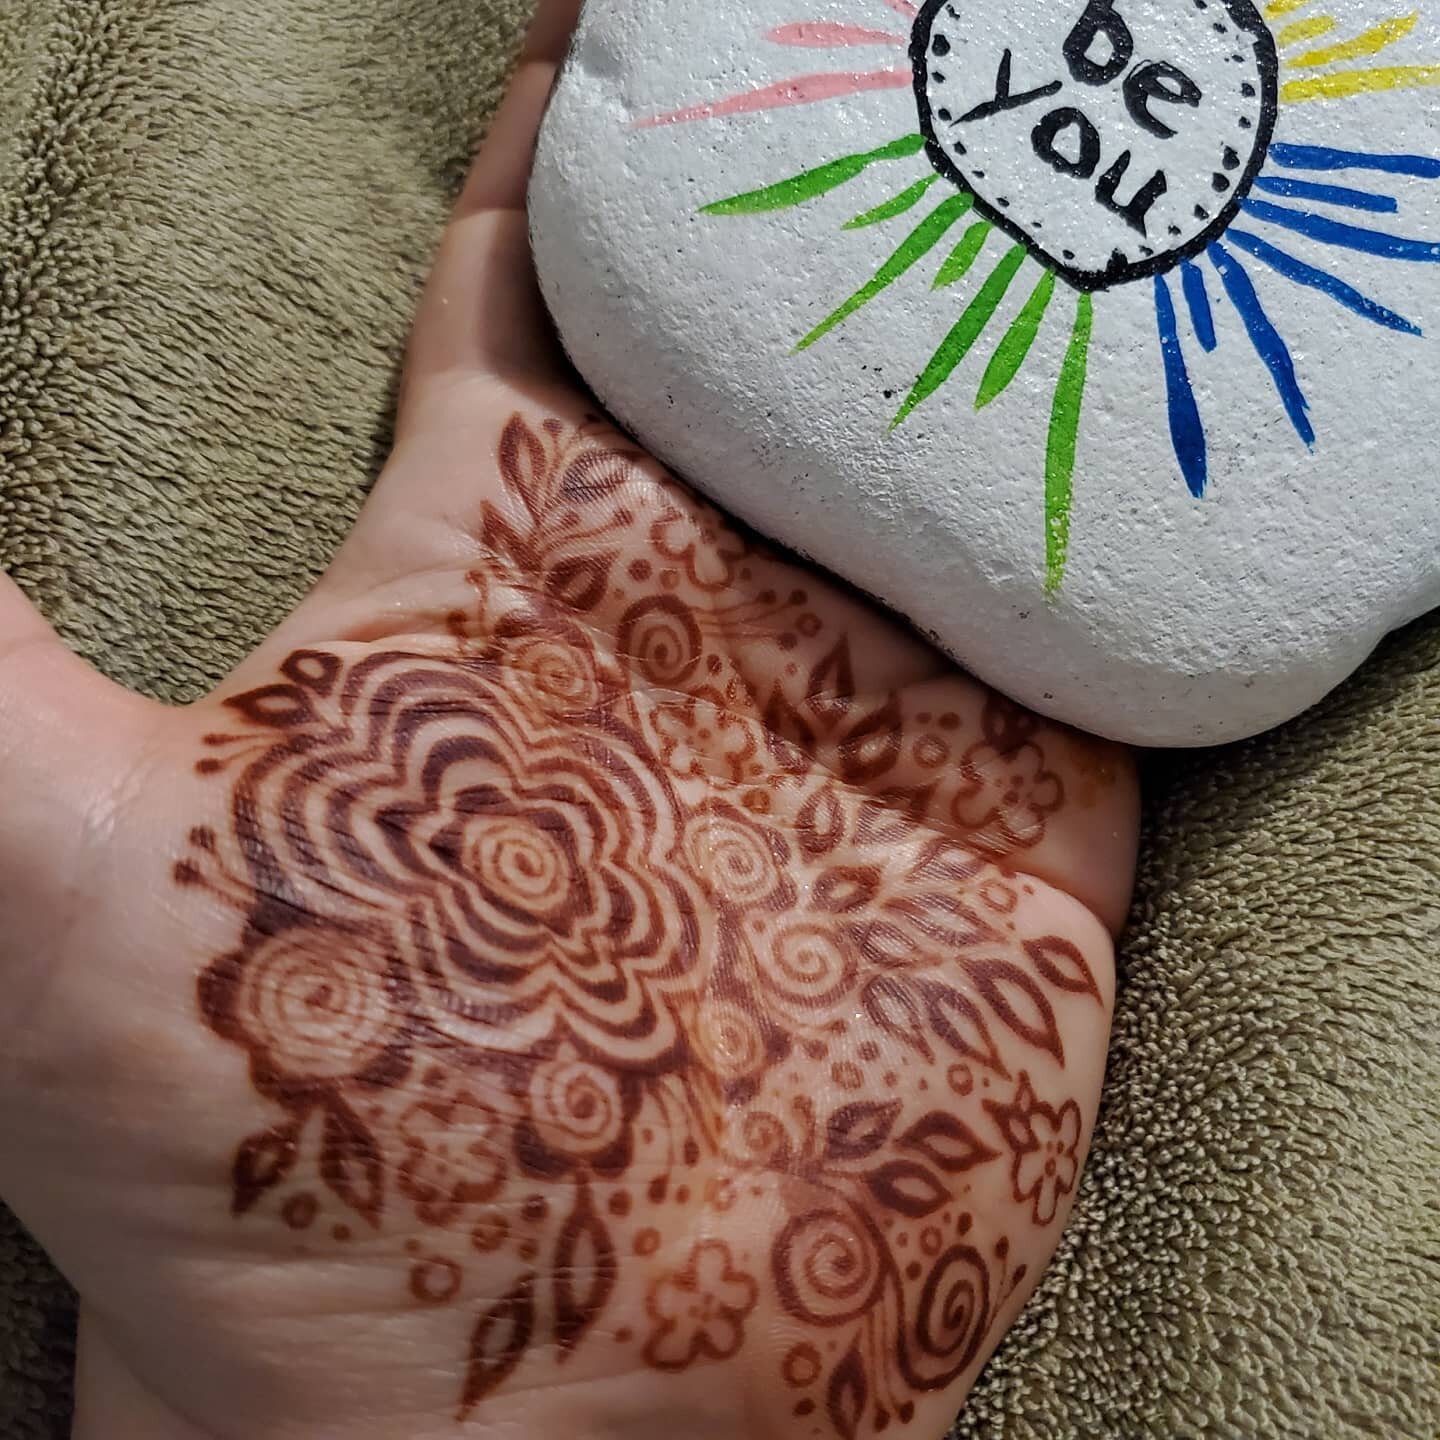 Get excited!! There's a special coming, but you'll want to act fast:

Thursday, March 18, will be our first ever $30 Thursday! These are 20 minute sessions, so 5 minutes more than our mini session for $5 less!

If you have never experienced henna bef